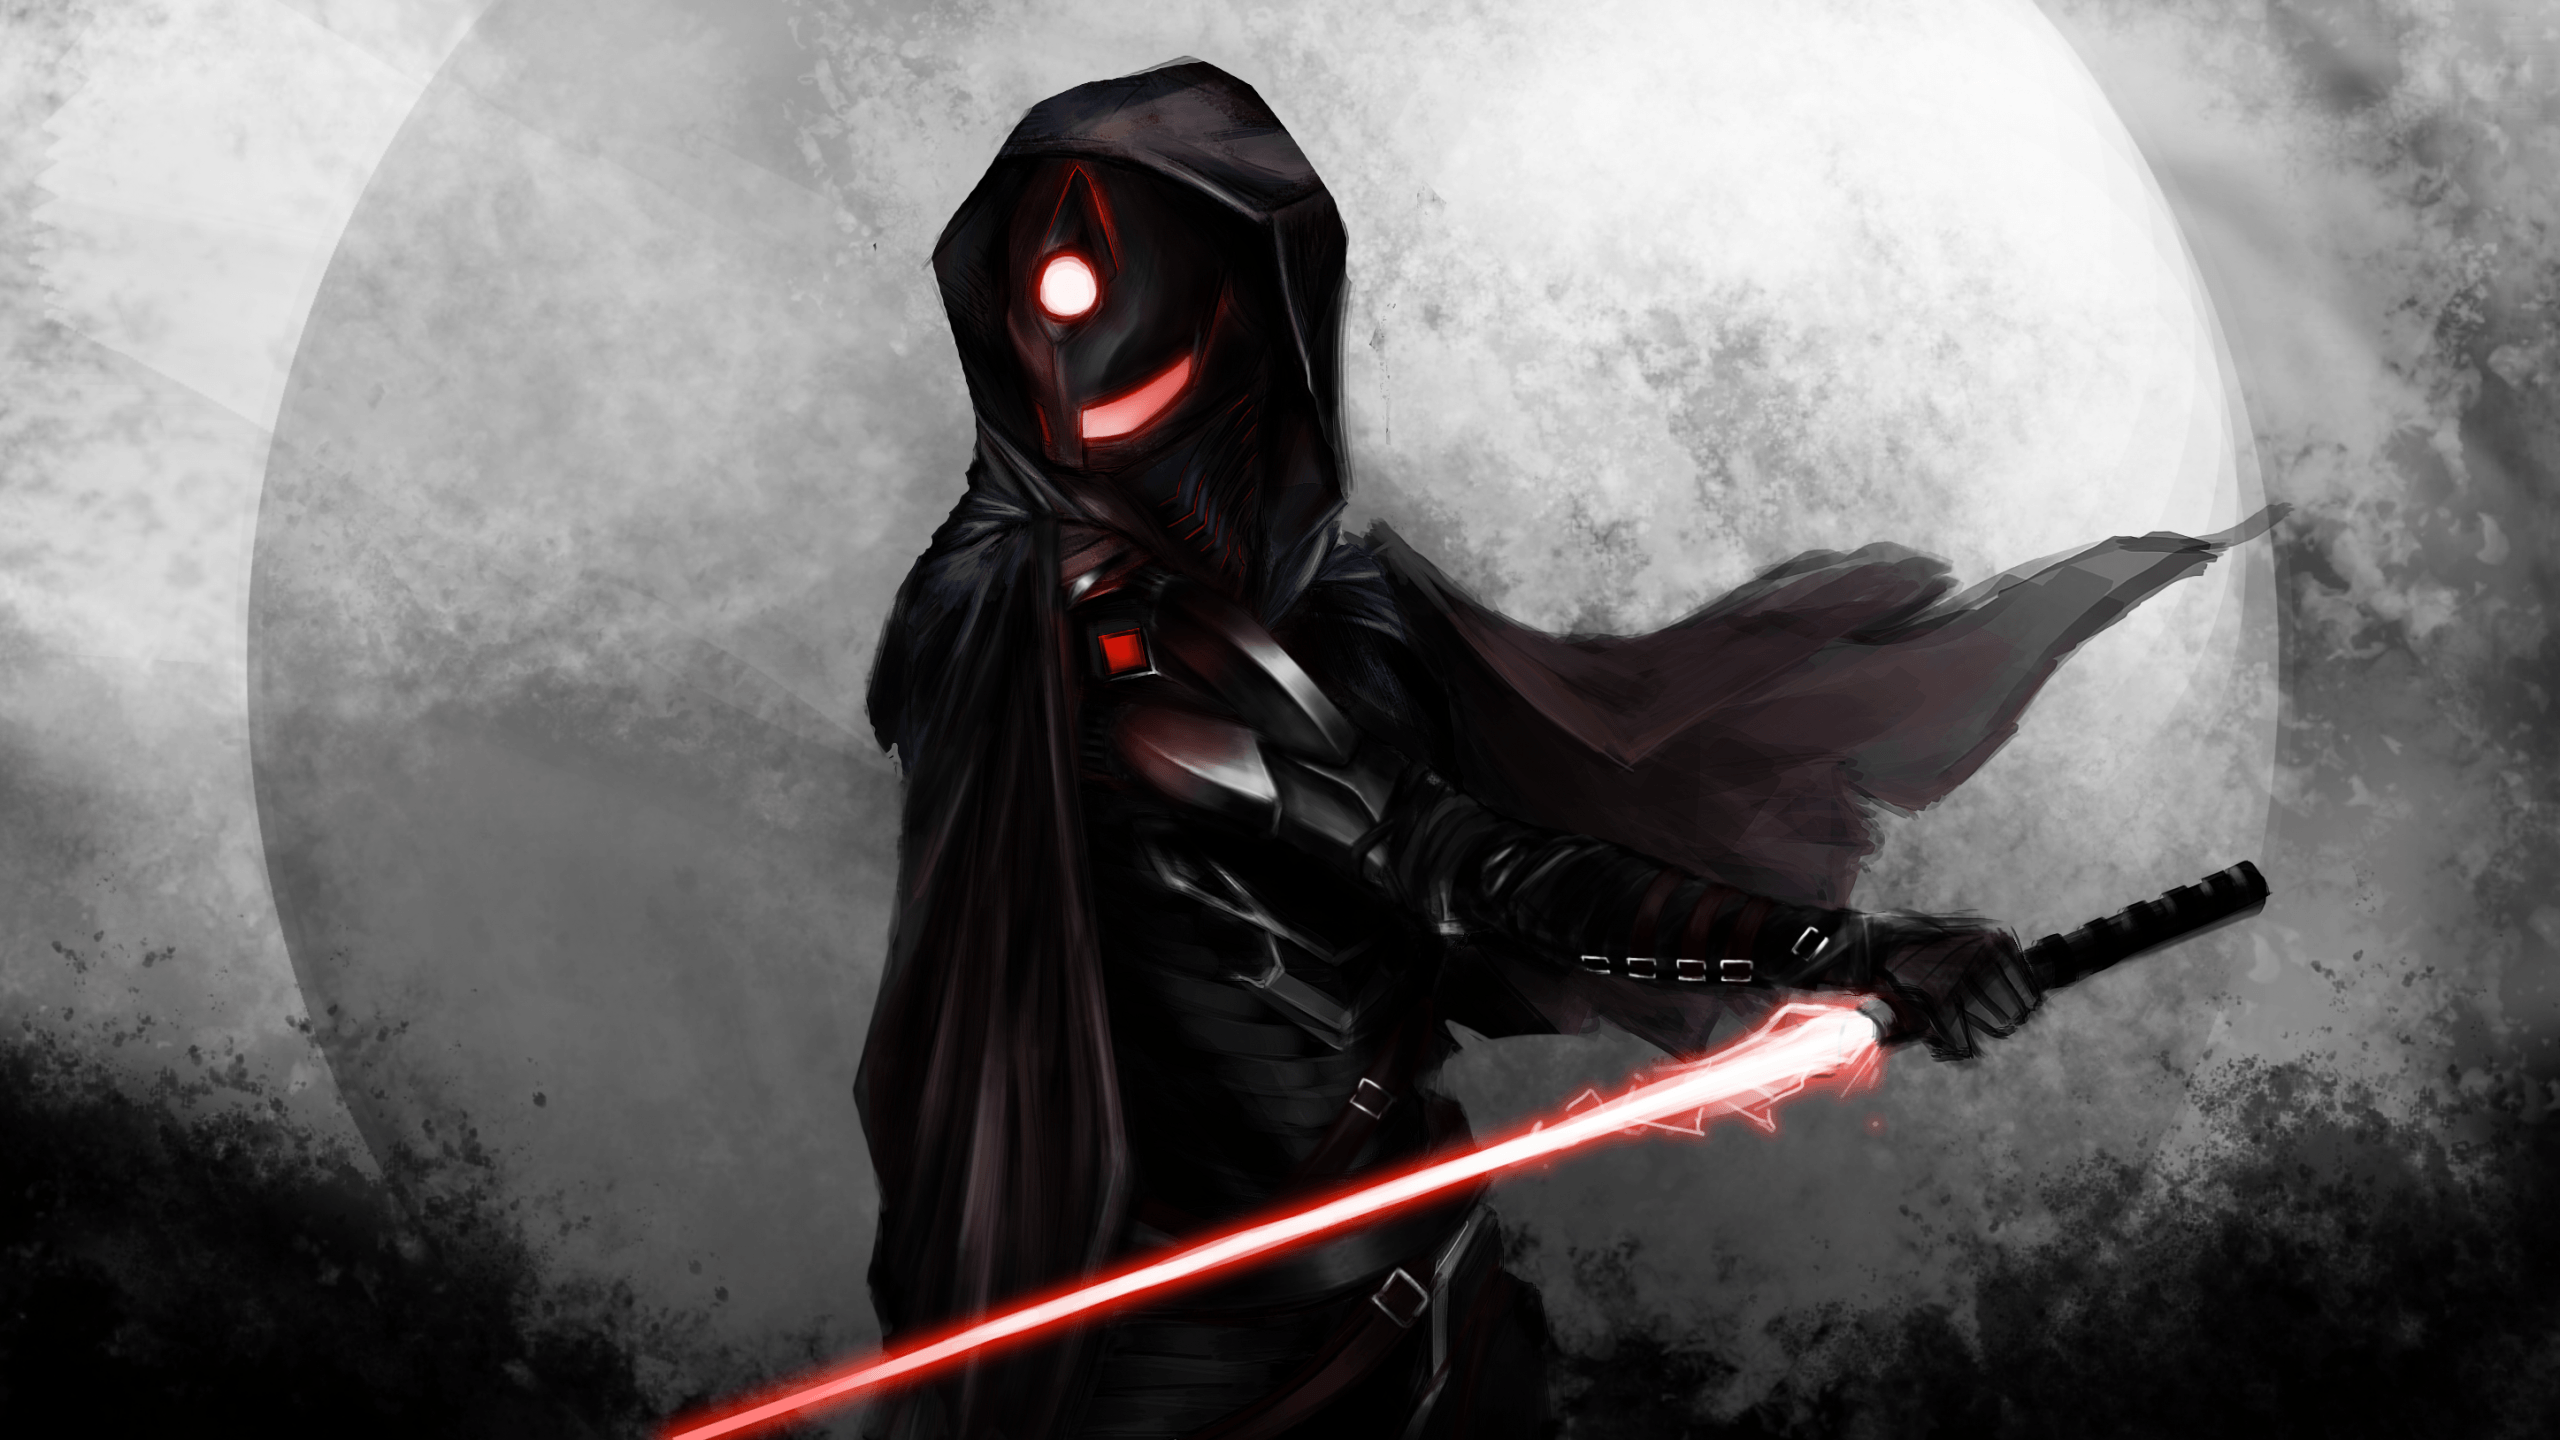 Revenge of the 5th  Sith Wallpaper by Thekingblader995 on DeviantArt